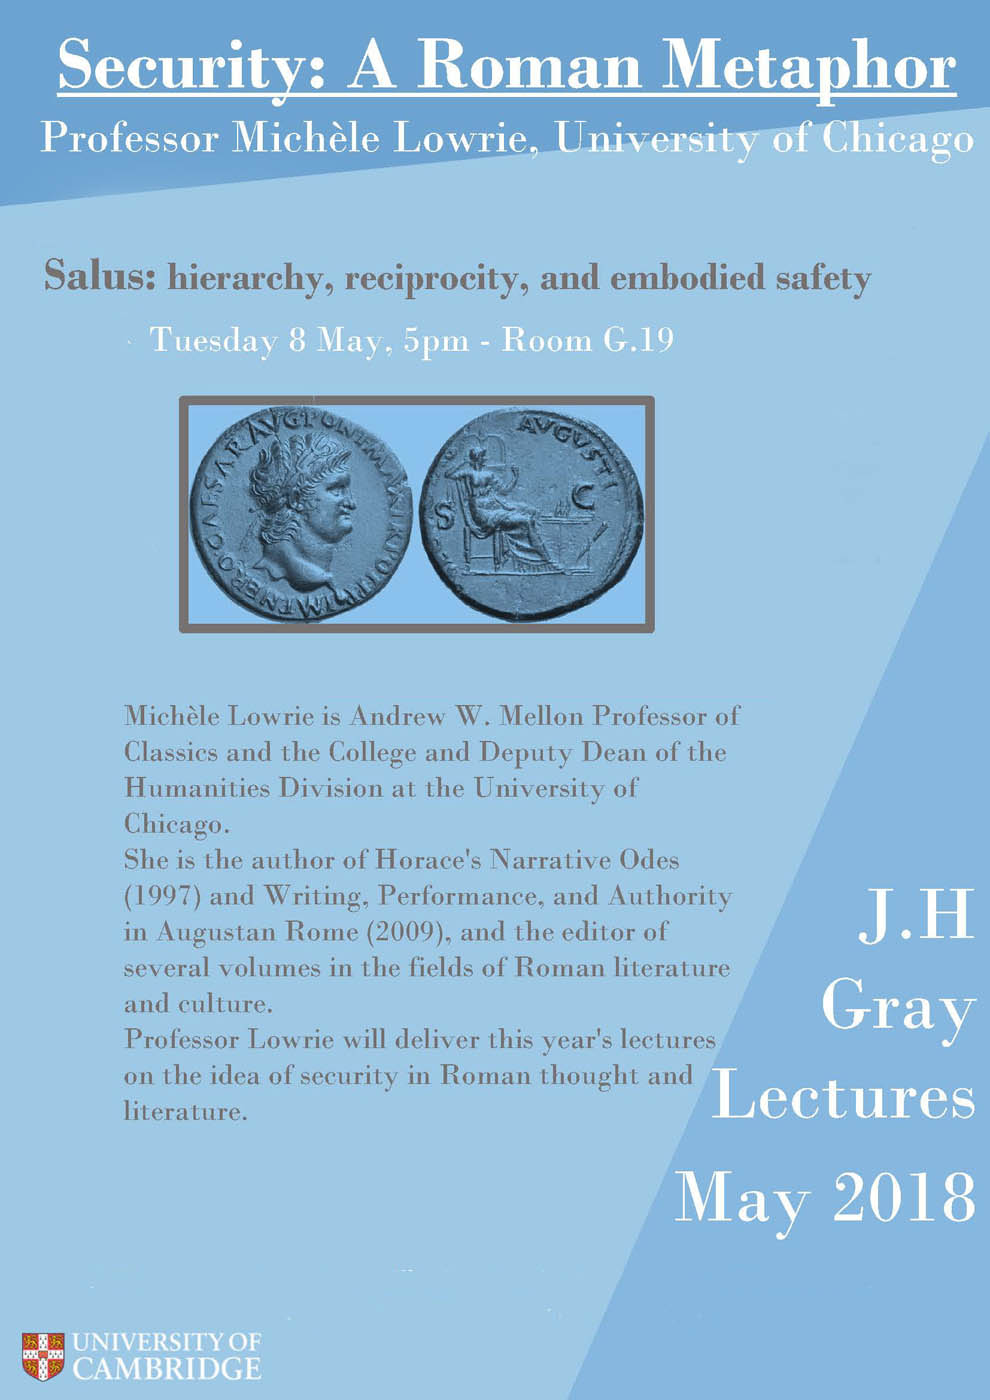 J H Gray Lecture 2018's image